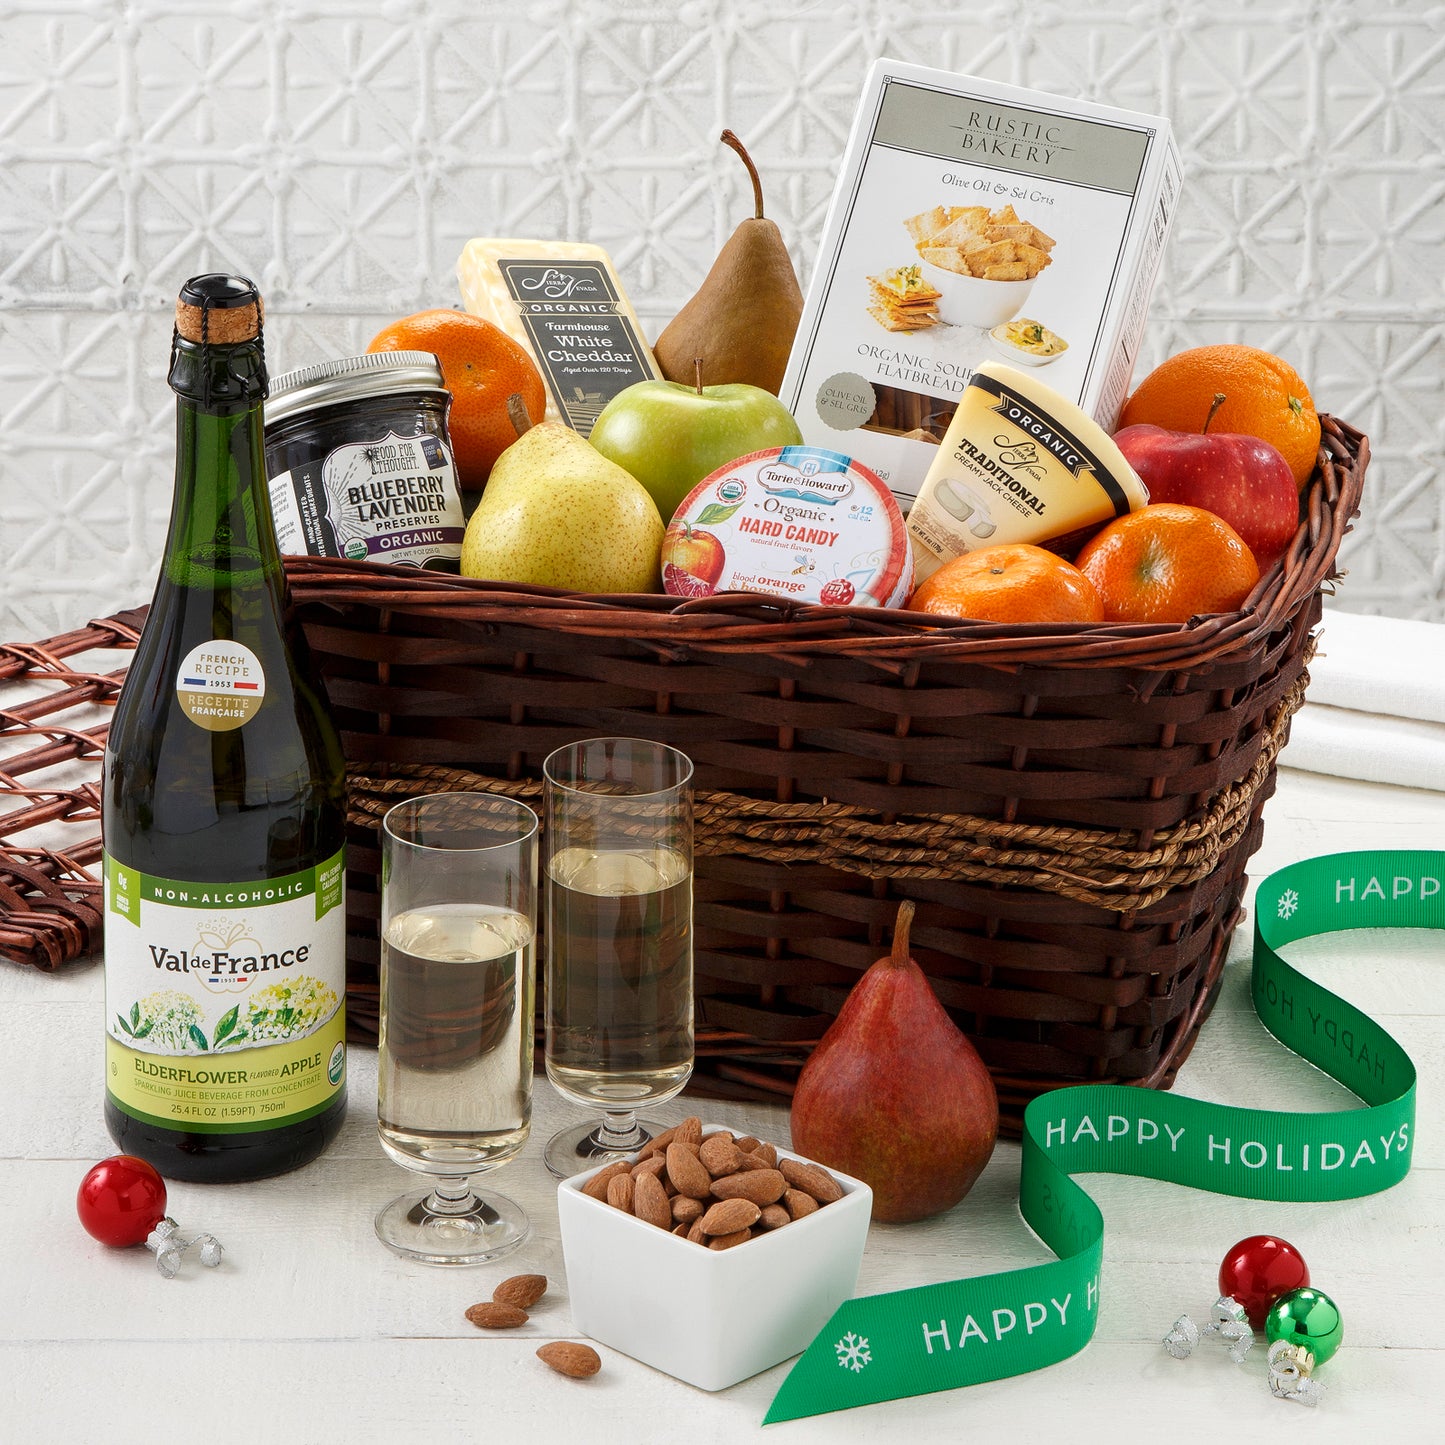 A brown gift basket filled with an assortment of fruit, nuts, cheese and a bottle of cider in front